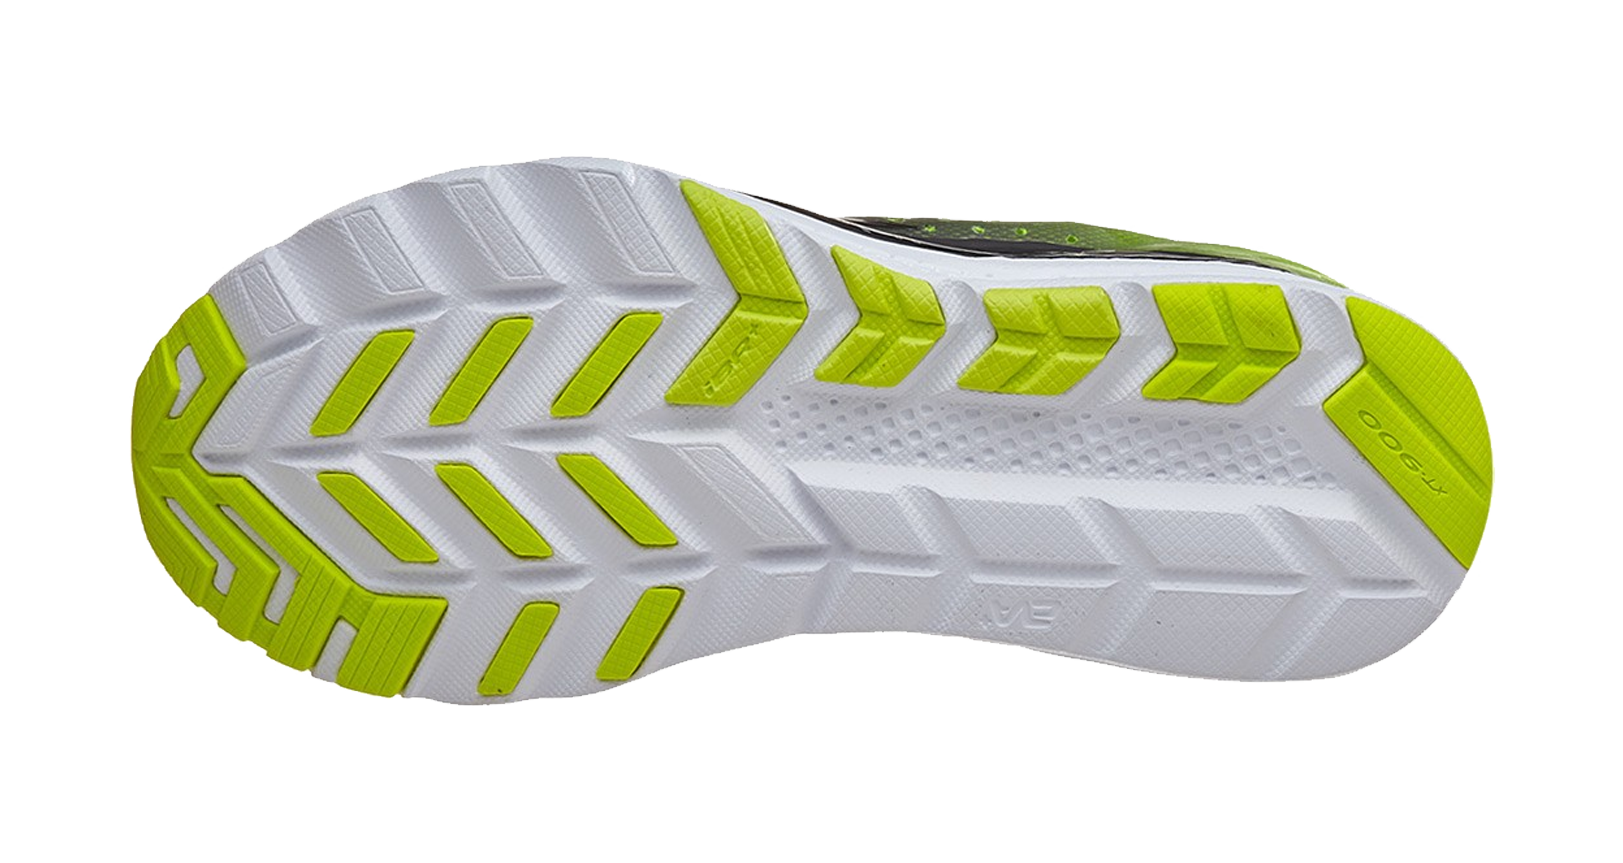 Saucony Kinvara 8 Performance Review - Believe in the Run